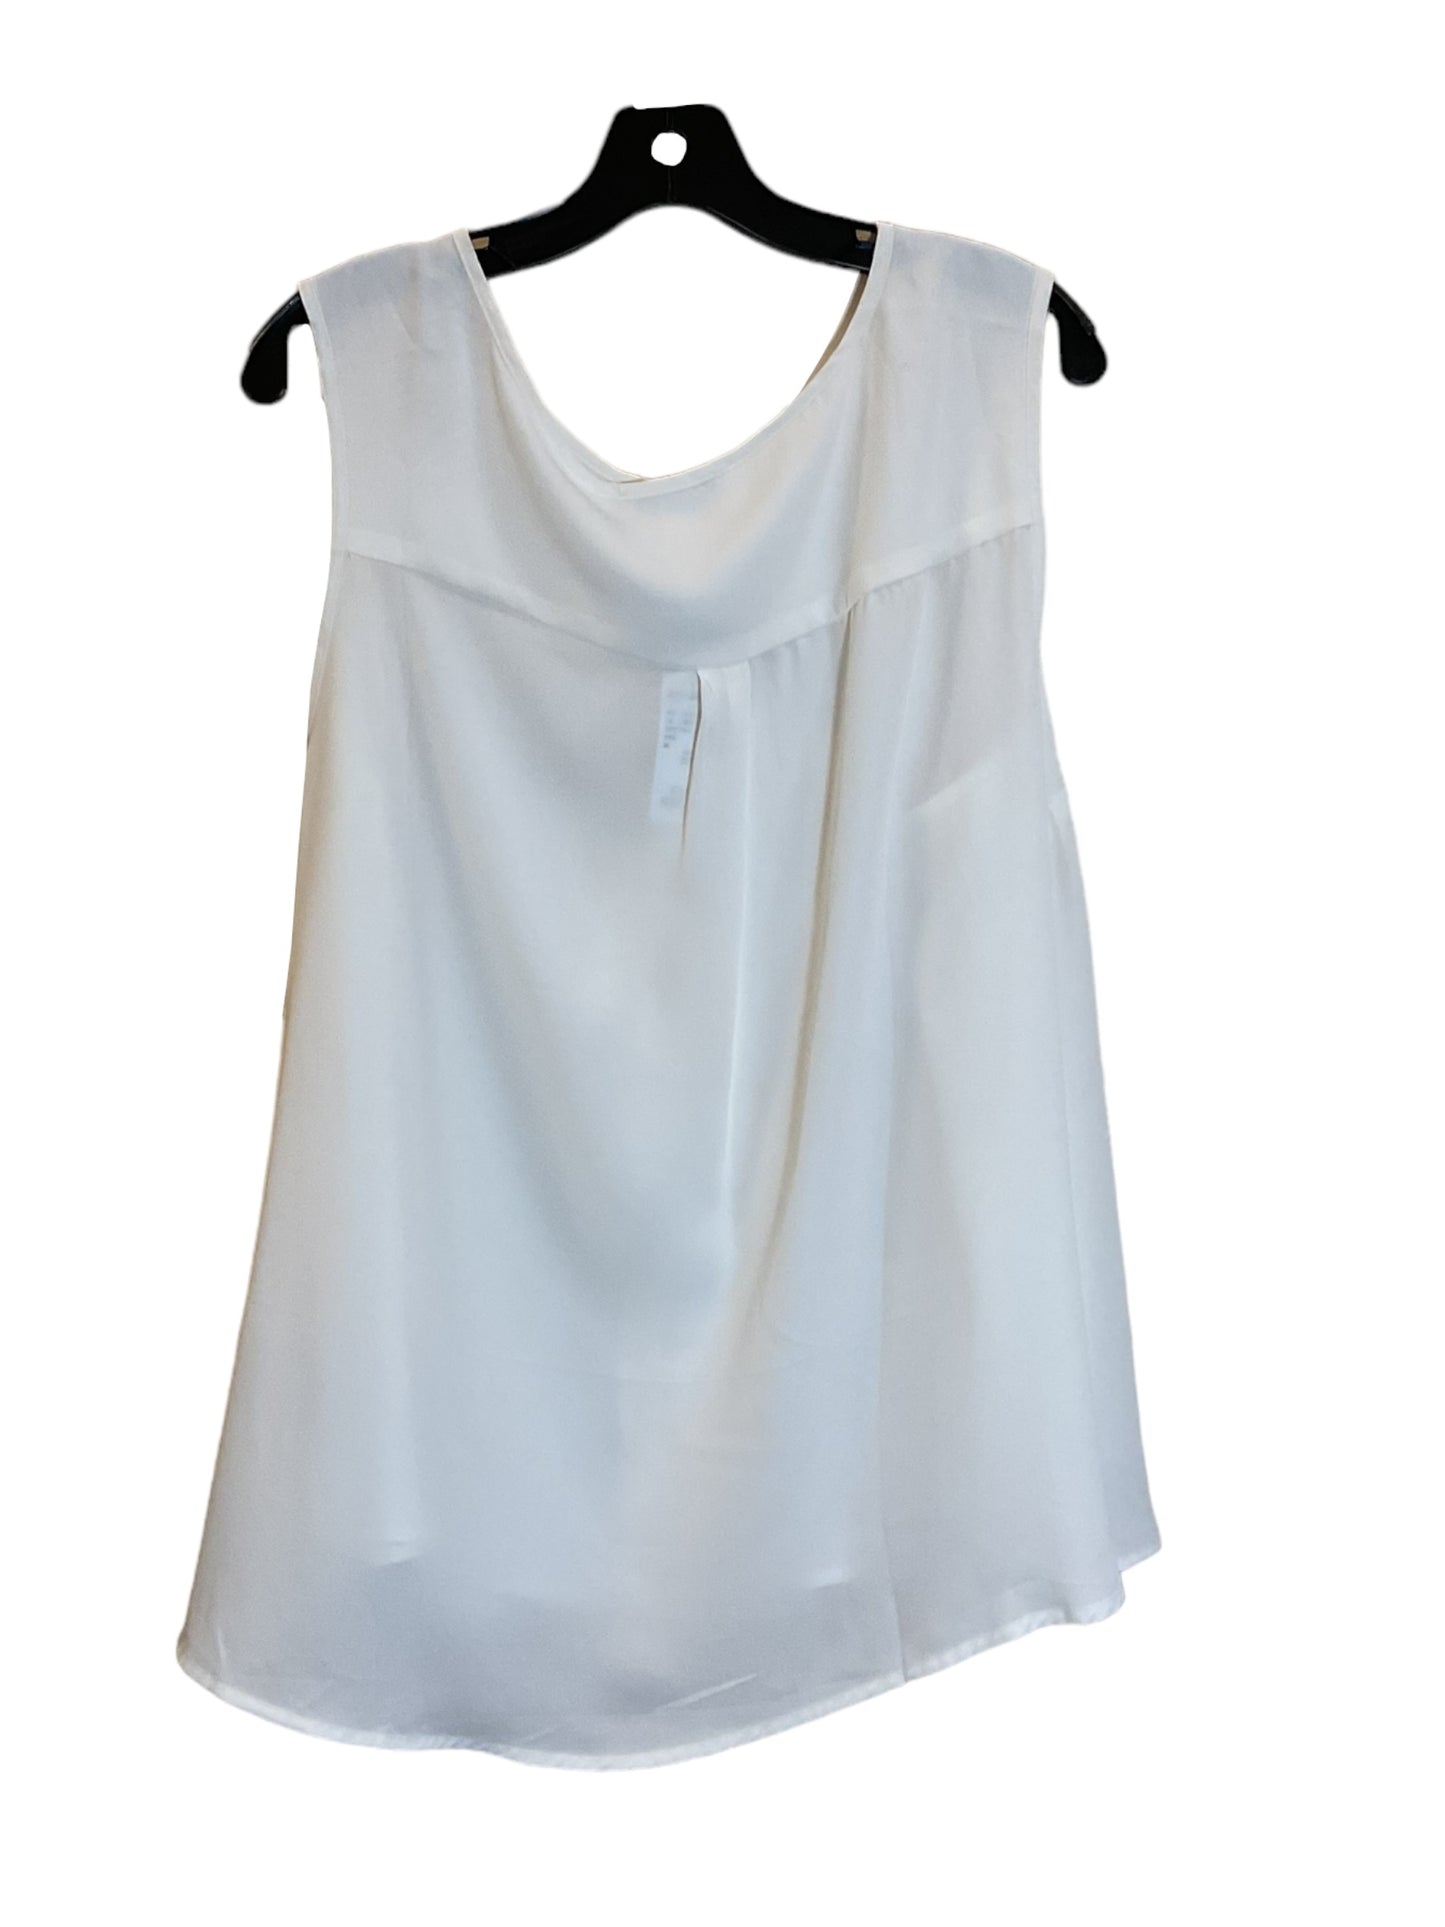 Top Sleeveless By Roz And Ali  Size: 3x